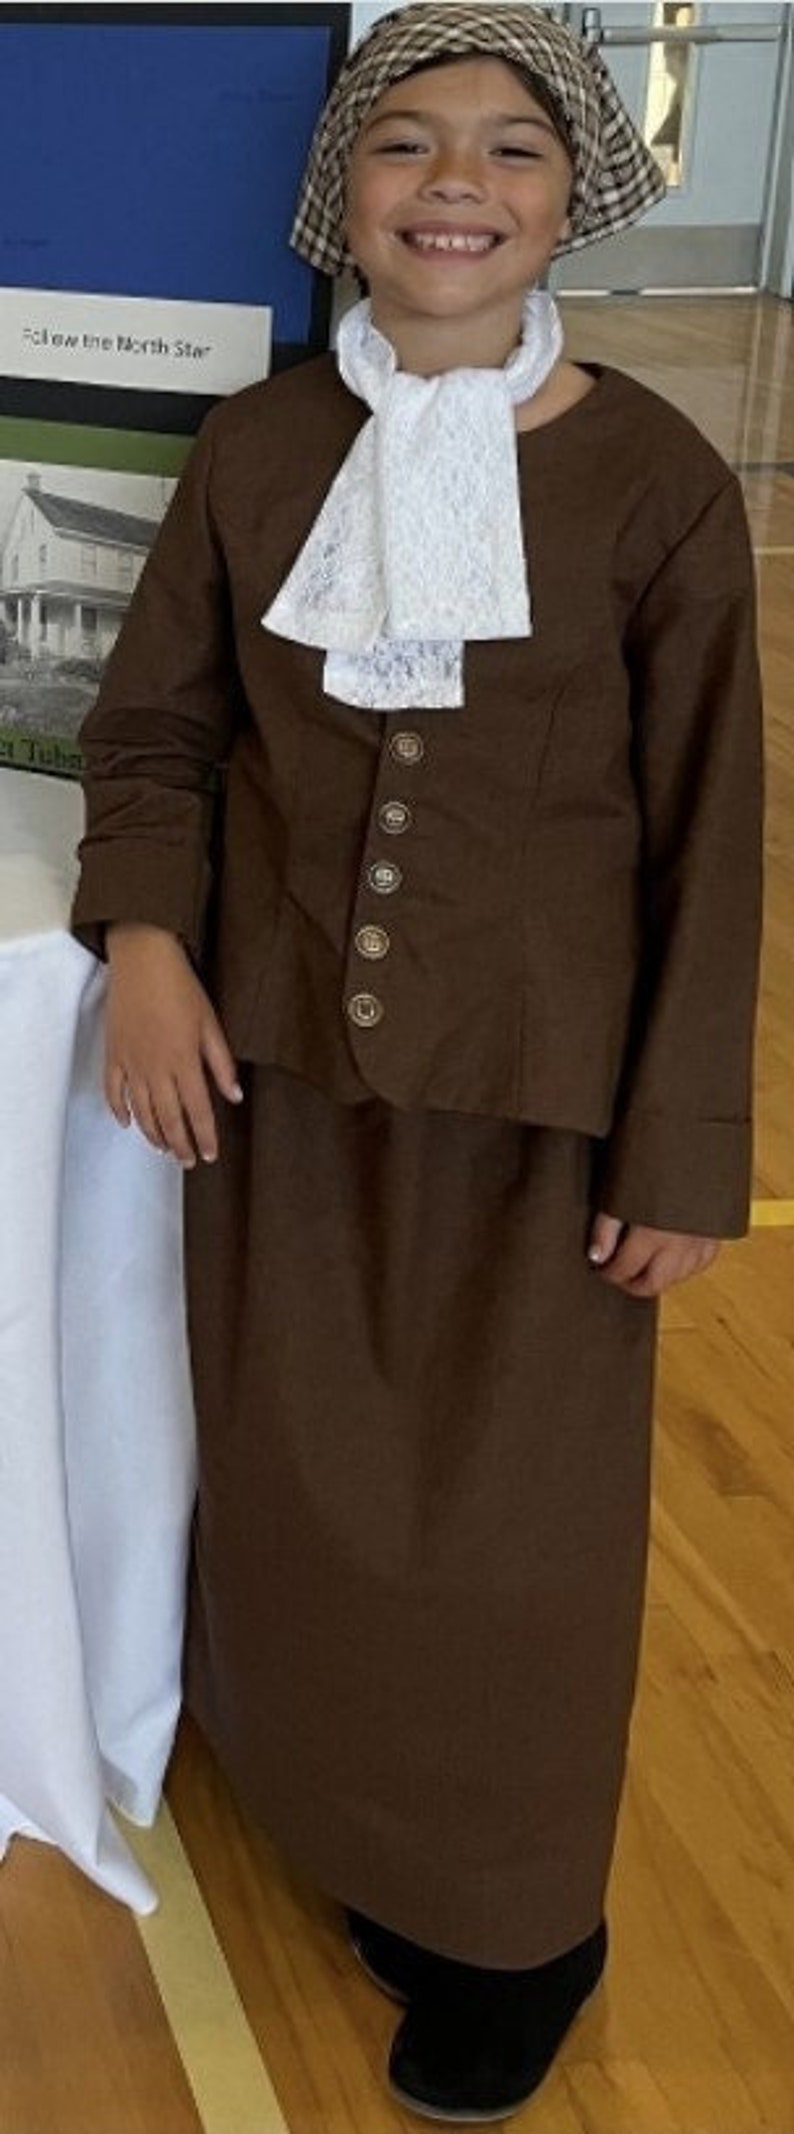 Harriet Tubman costume for girls abolitionist freedom fighter civil war scout Historical Costume wax museum Historywearz costume image 1